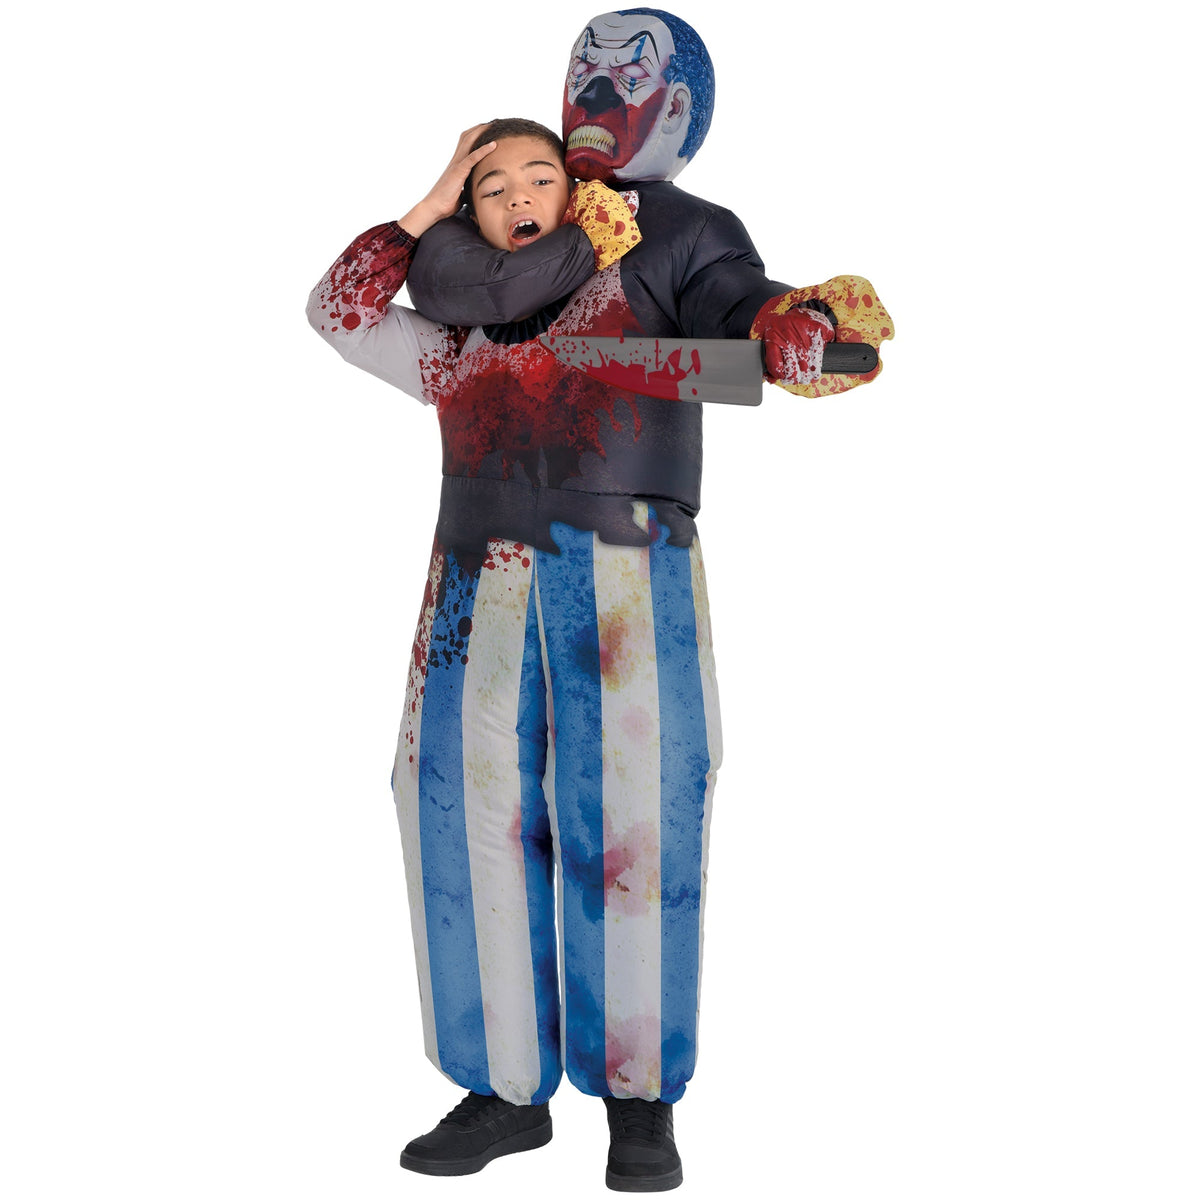 HALLOWEEN COSTUME CO. Costumes Inflatable Clown Capture Costume for Kids 192937455036